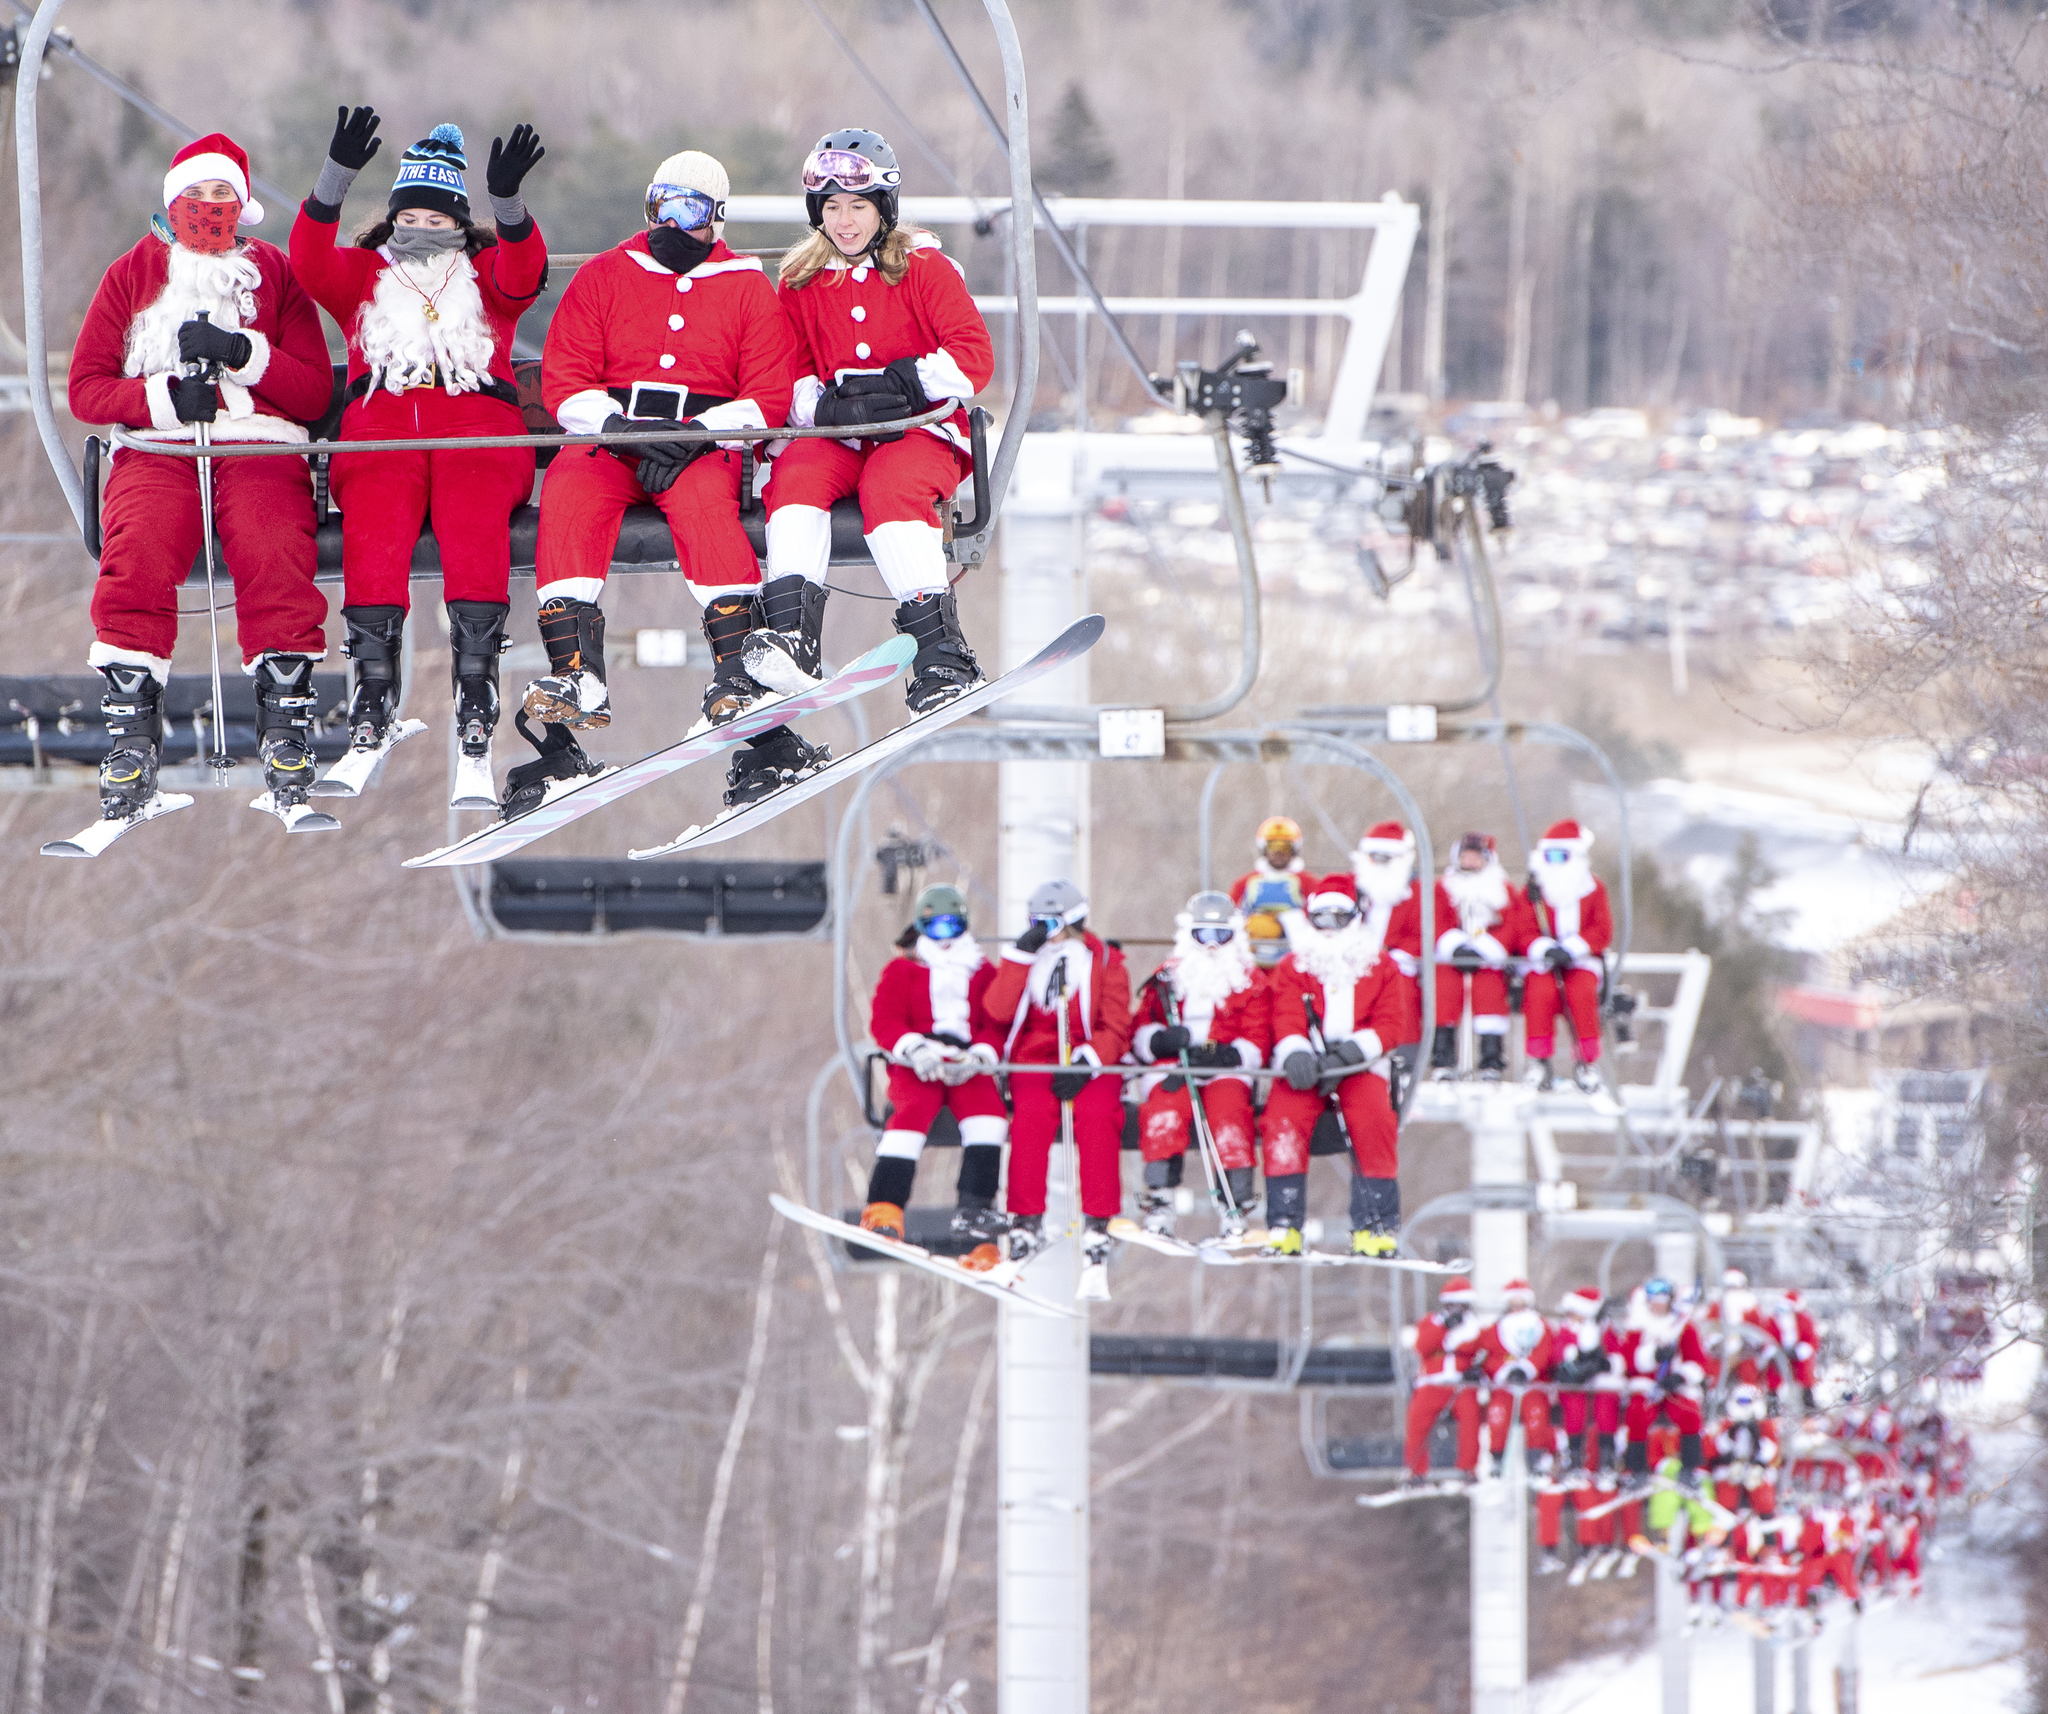 Skiers and snowboarders hit the slopes at Sunday River Ski Resort in Newry, Maine.